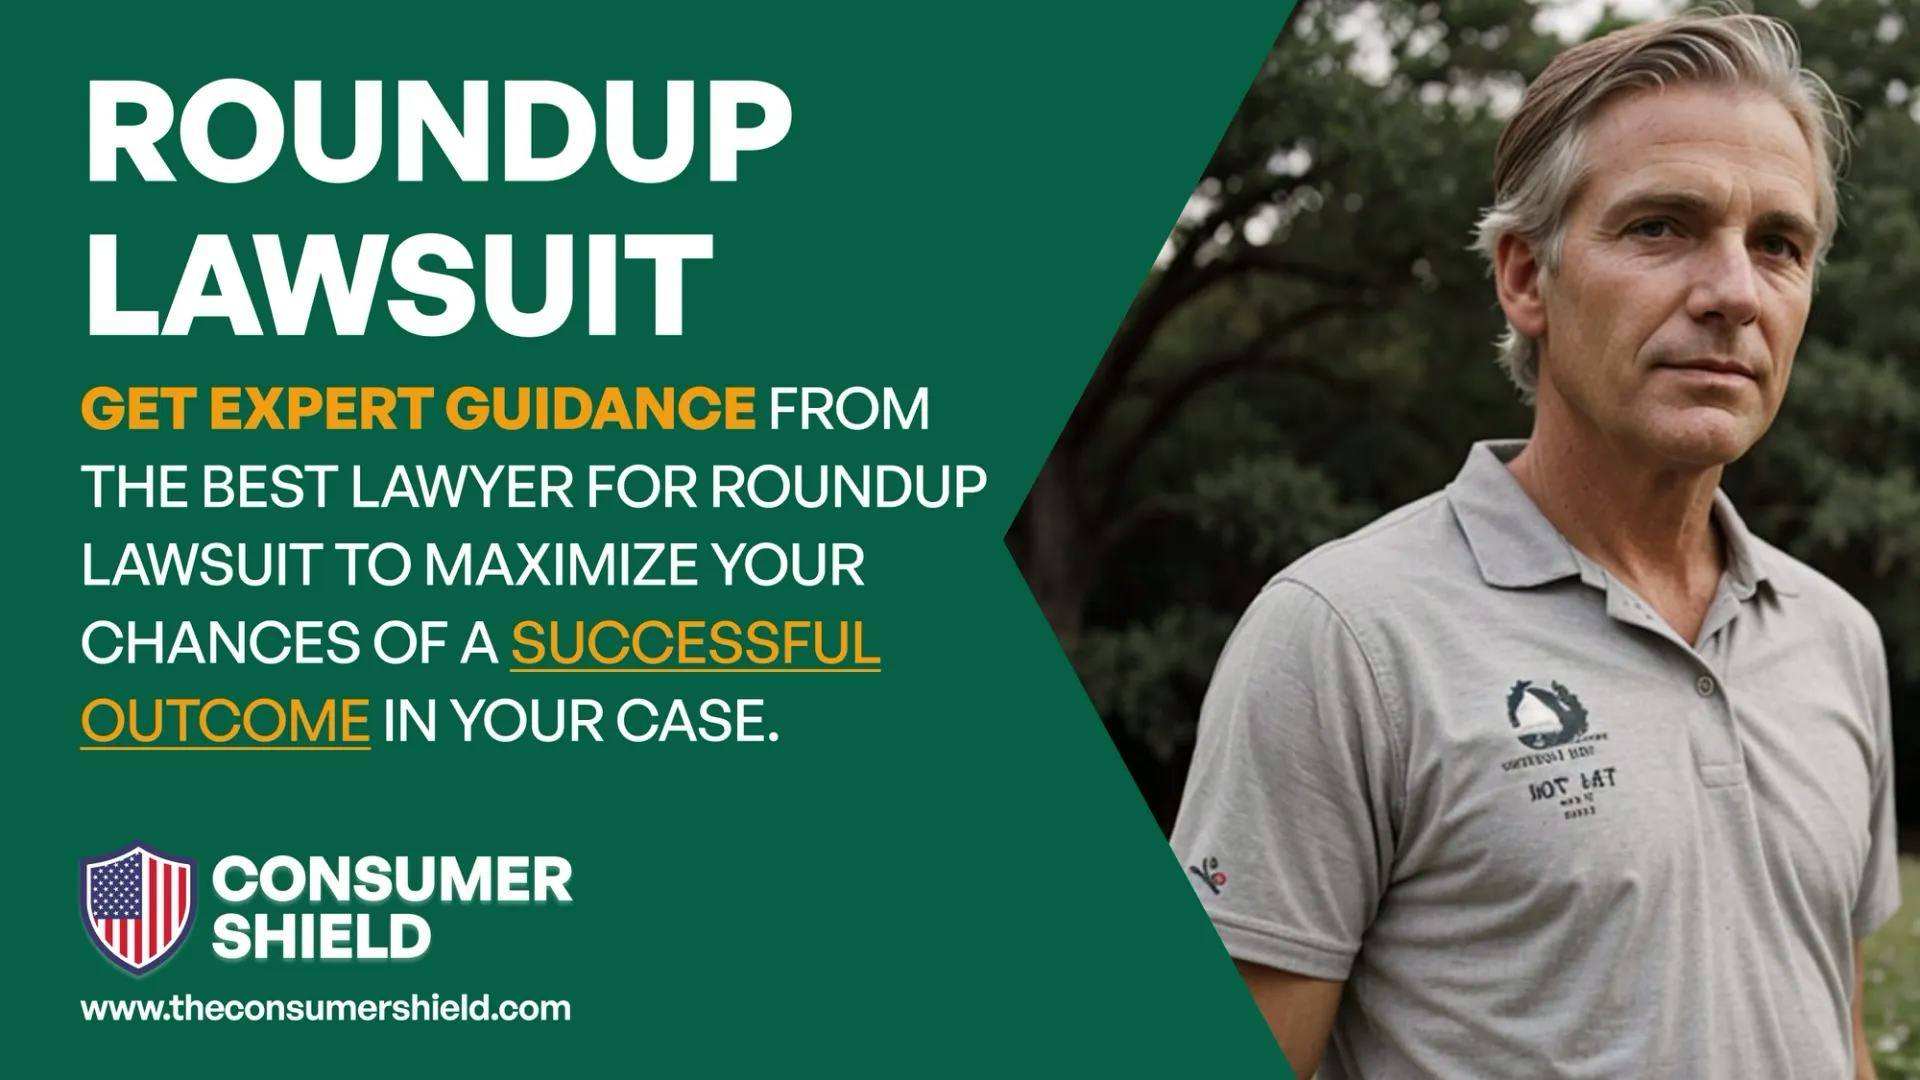 Finding the Best Lawyer for Your Roundup Lawsuit: Expert Legal Guidance and Support